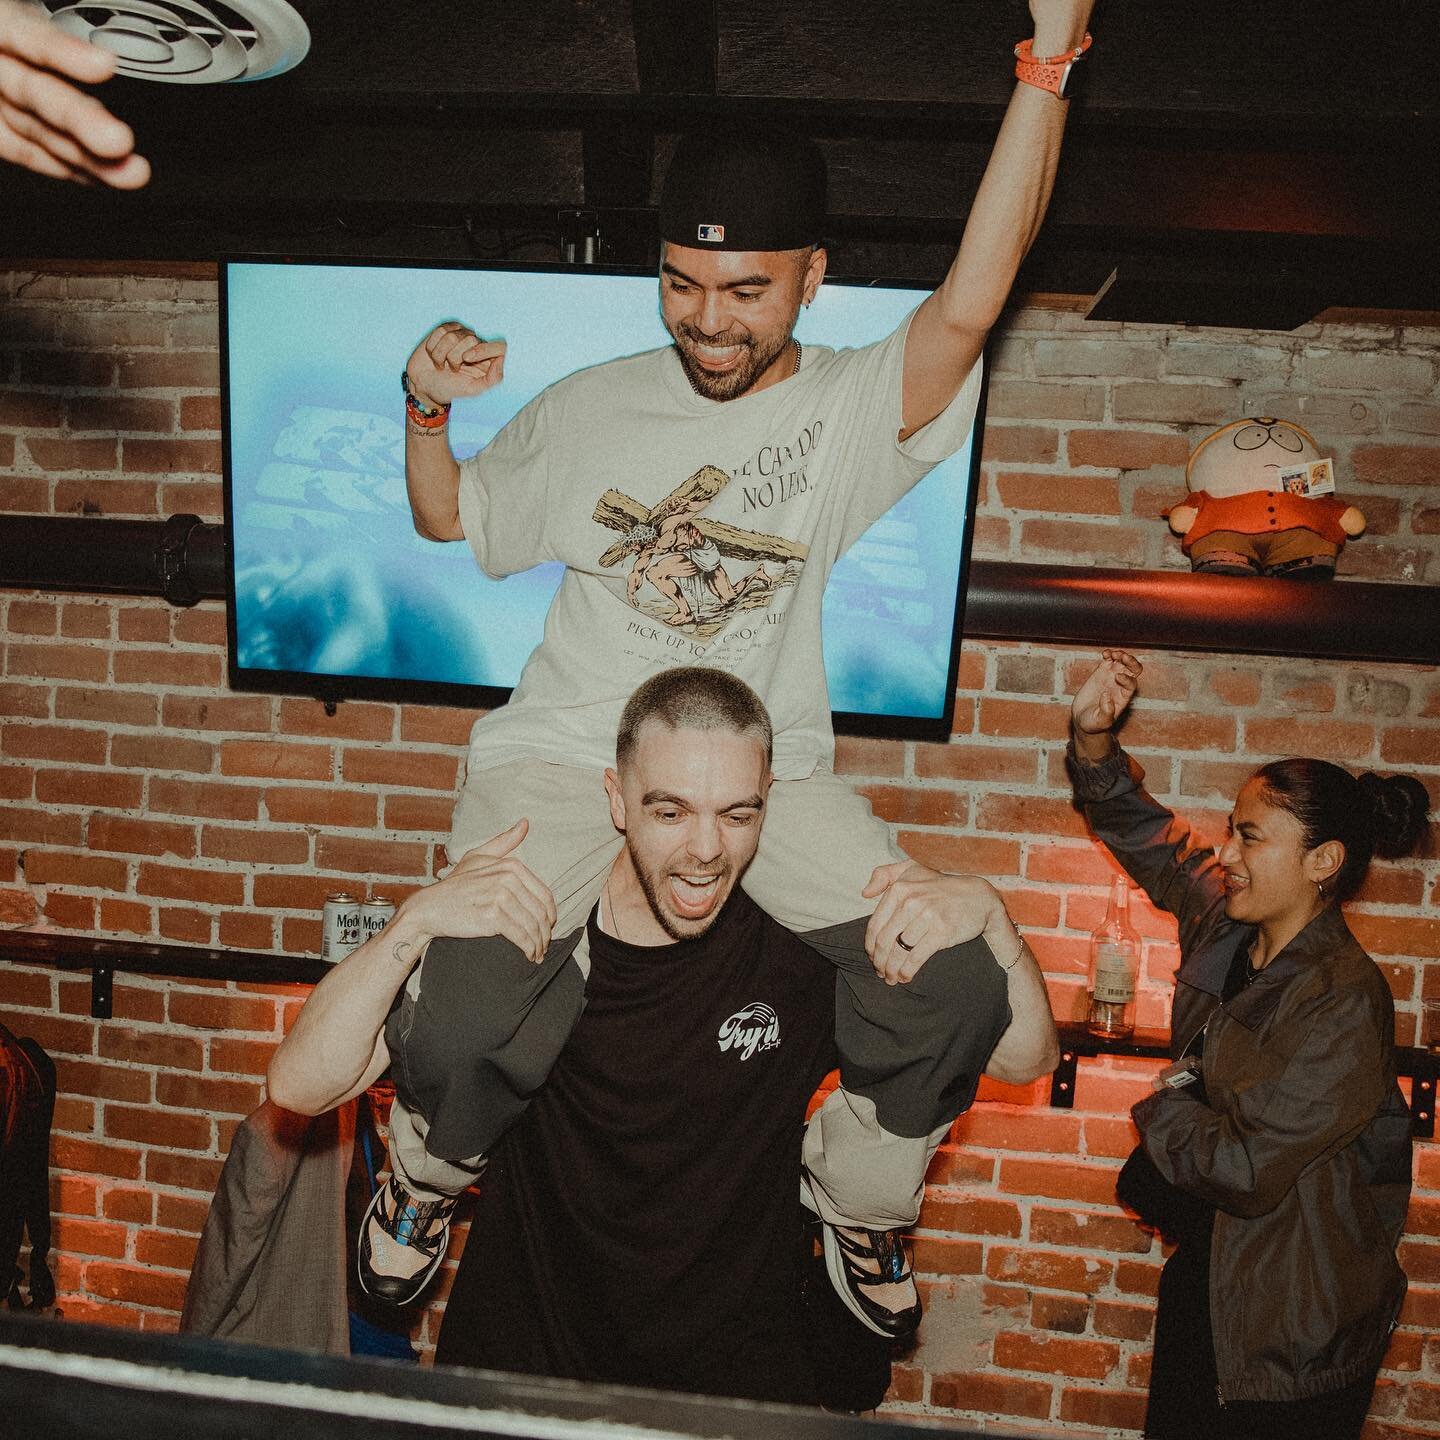 Who needs Coachella when you've got @milesmedina and @madebyrcade giving us a show!⁣
⁣
Head to our linktree to see what shenanigans we got into 🤪📸⁣
 ⁣⁣⁣⁣
⁣⁣⁣⁣⁣⁣⁣⁣⁣⁣Celebrating?! Don&rsquo;t sleep! 😴 Secure your spot in the spotlight at info@recroo